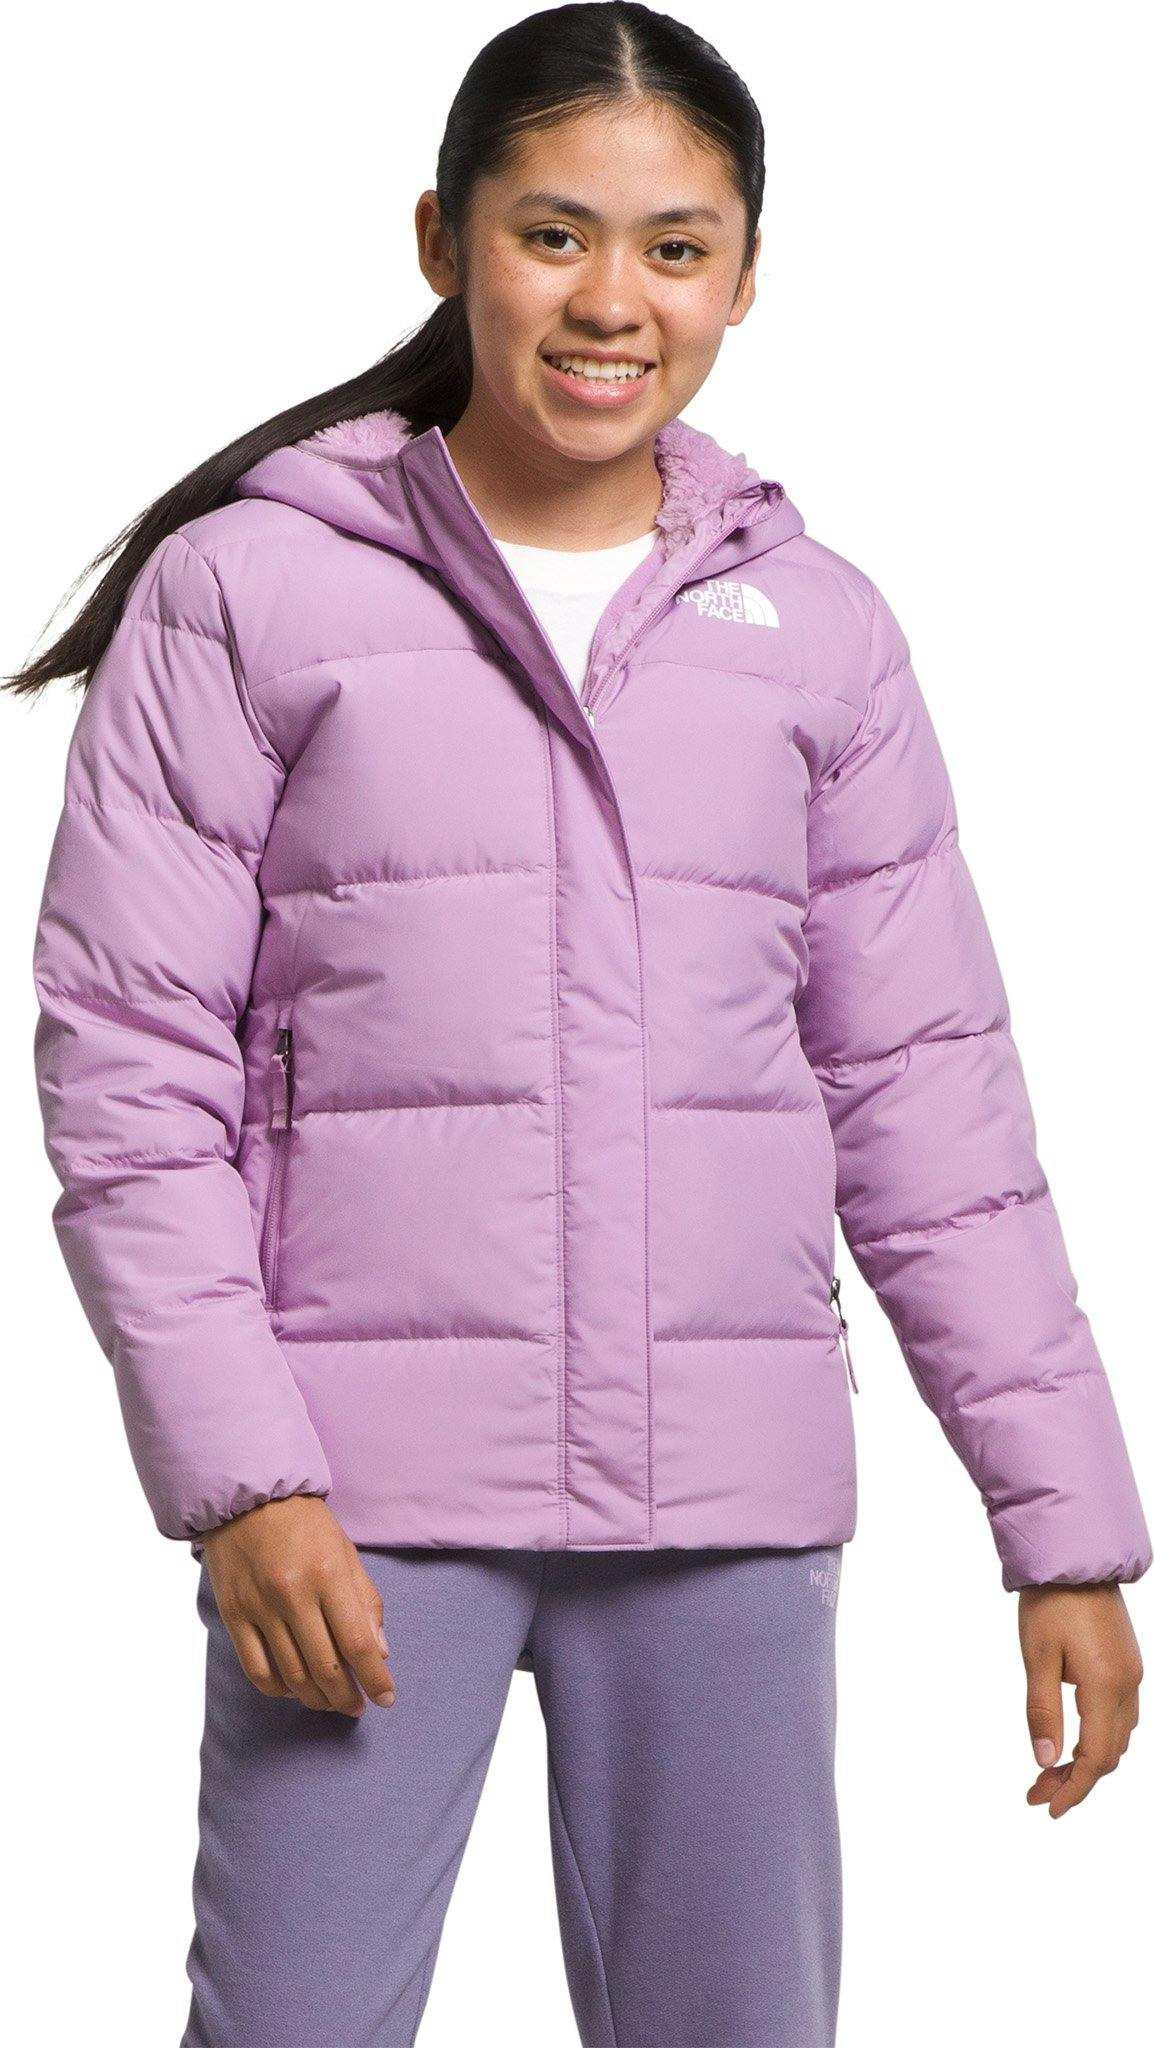 Product image for North Down Fleece-Lined Parka - Girls